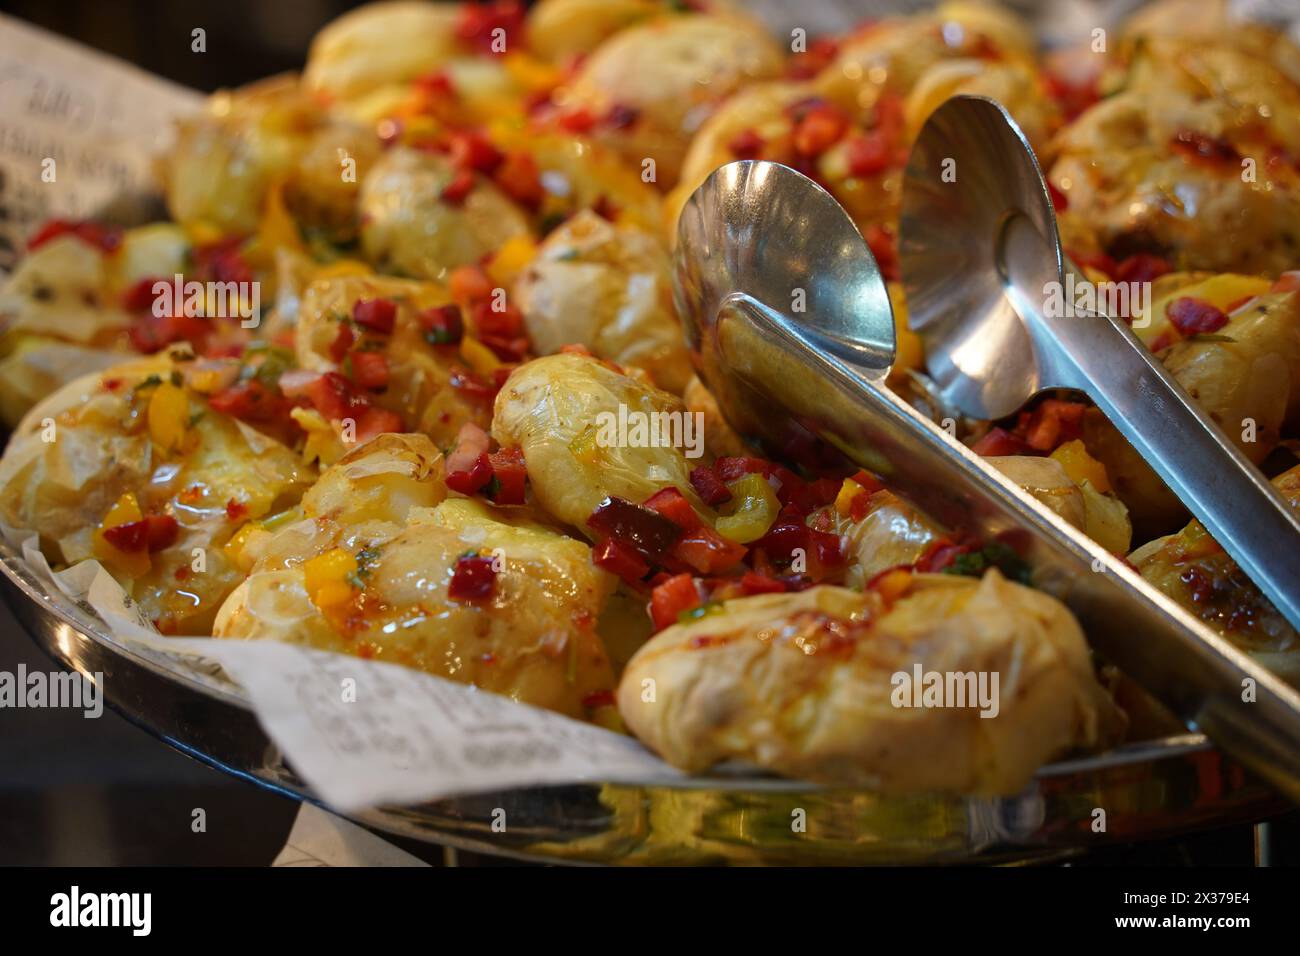 Whole baked potatoes with vegetables and oil close up Stock Photo